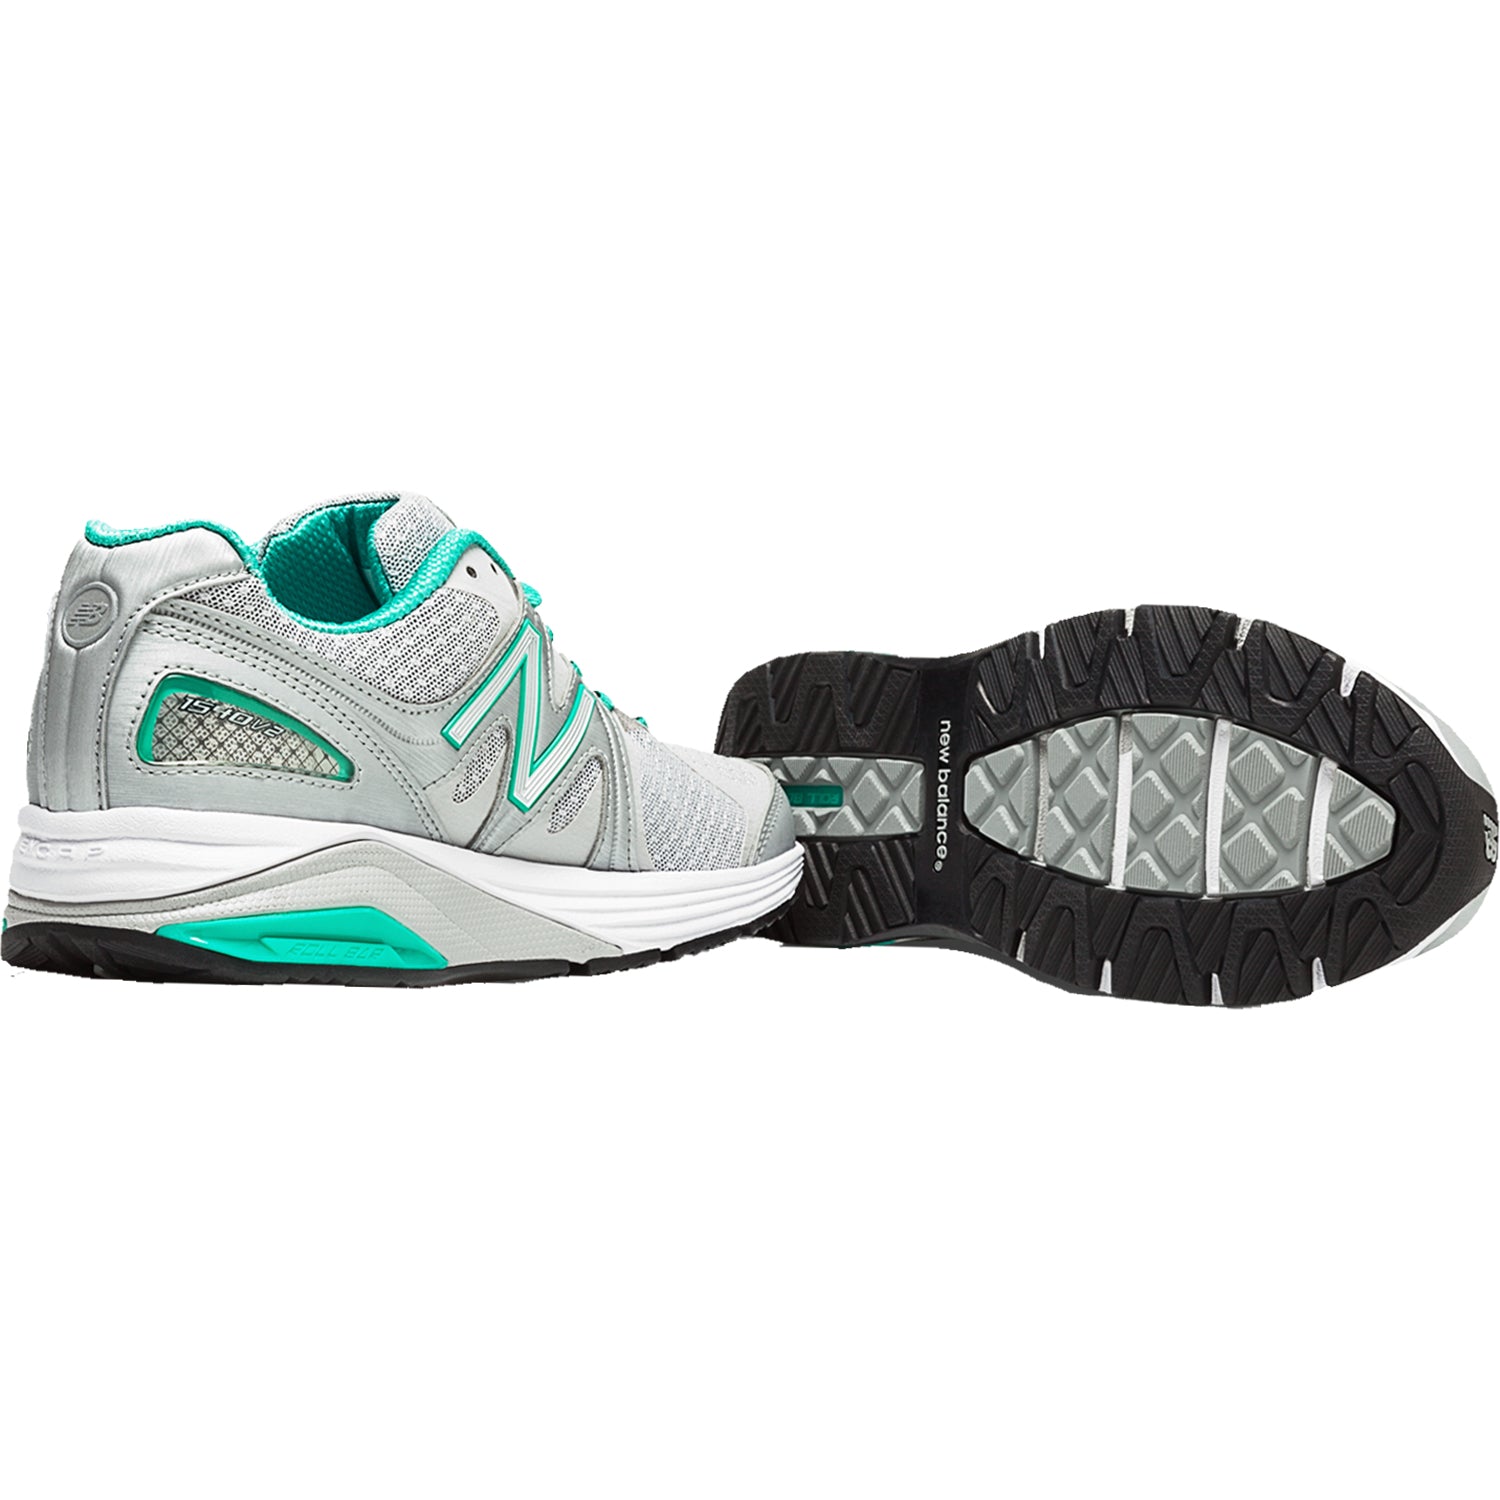 New Balance W1540v2 Women's Athletic Running Shoes – Footwear etc.